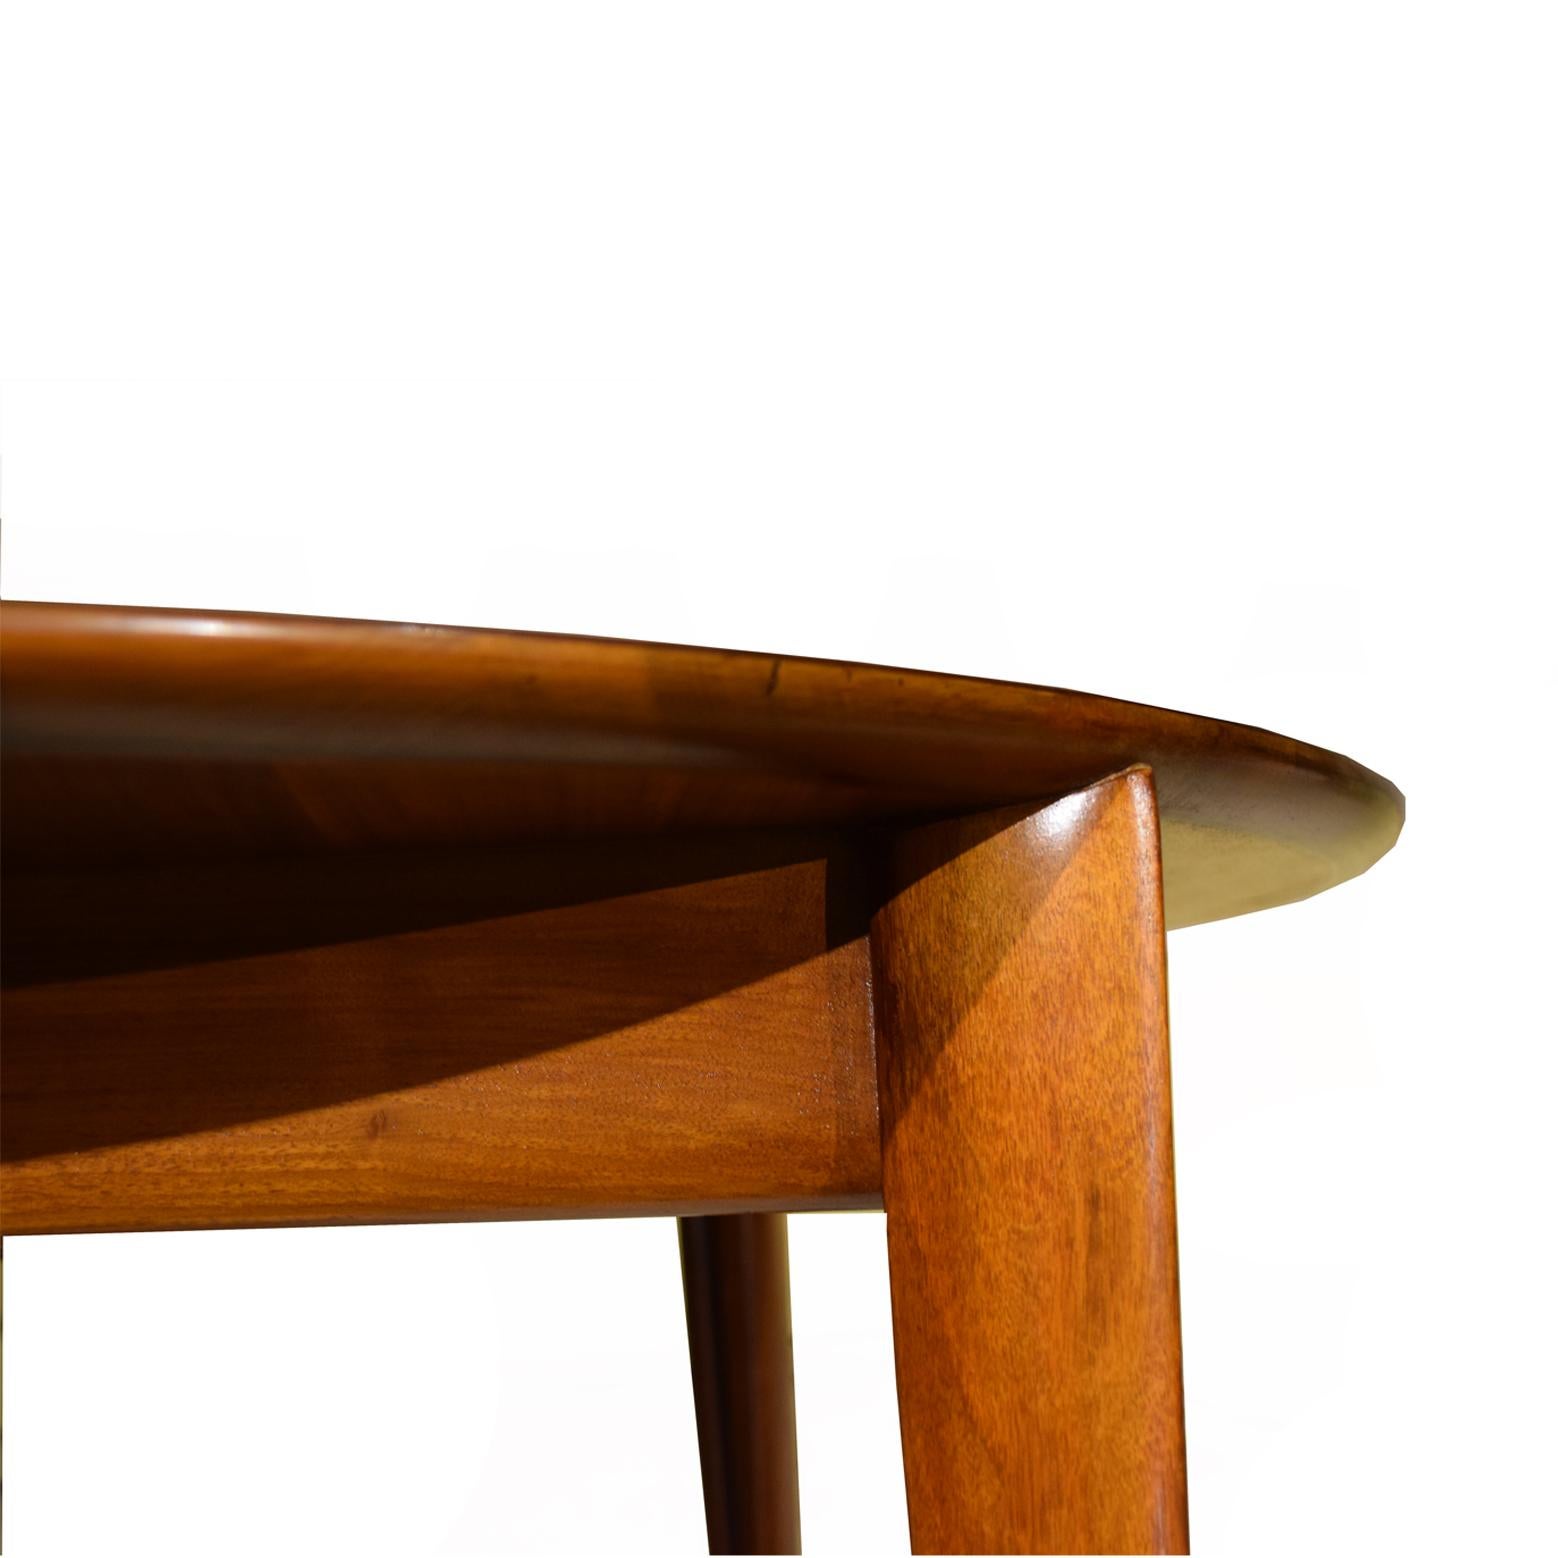 GIO ponti dining table for singer & sons: Circa 1953. Made in Italy for Singer & Sons. Italian walnut and brass.